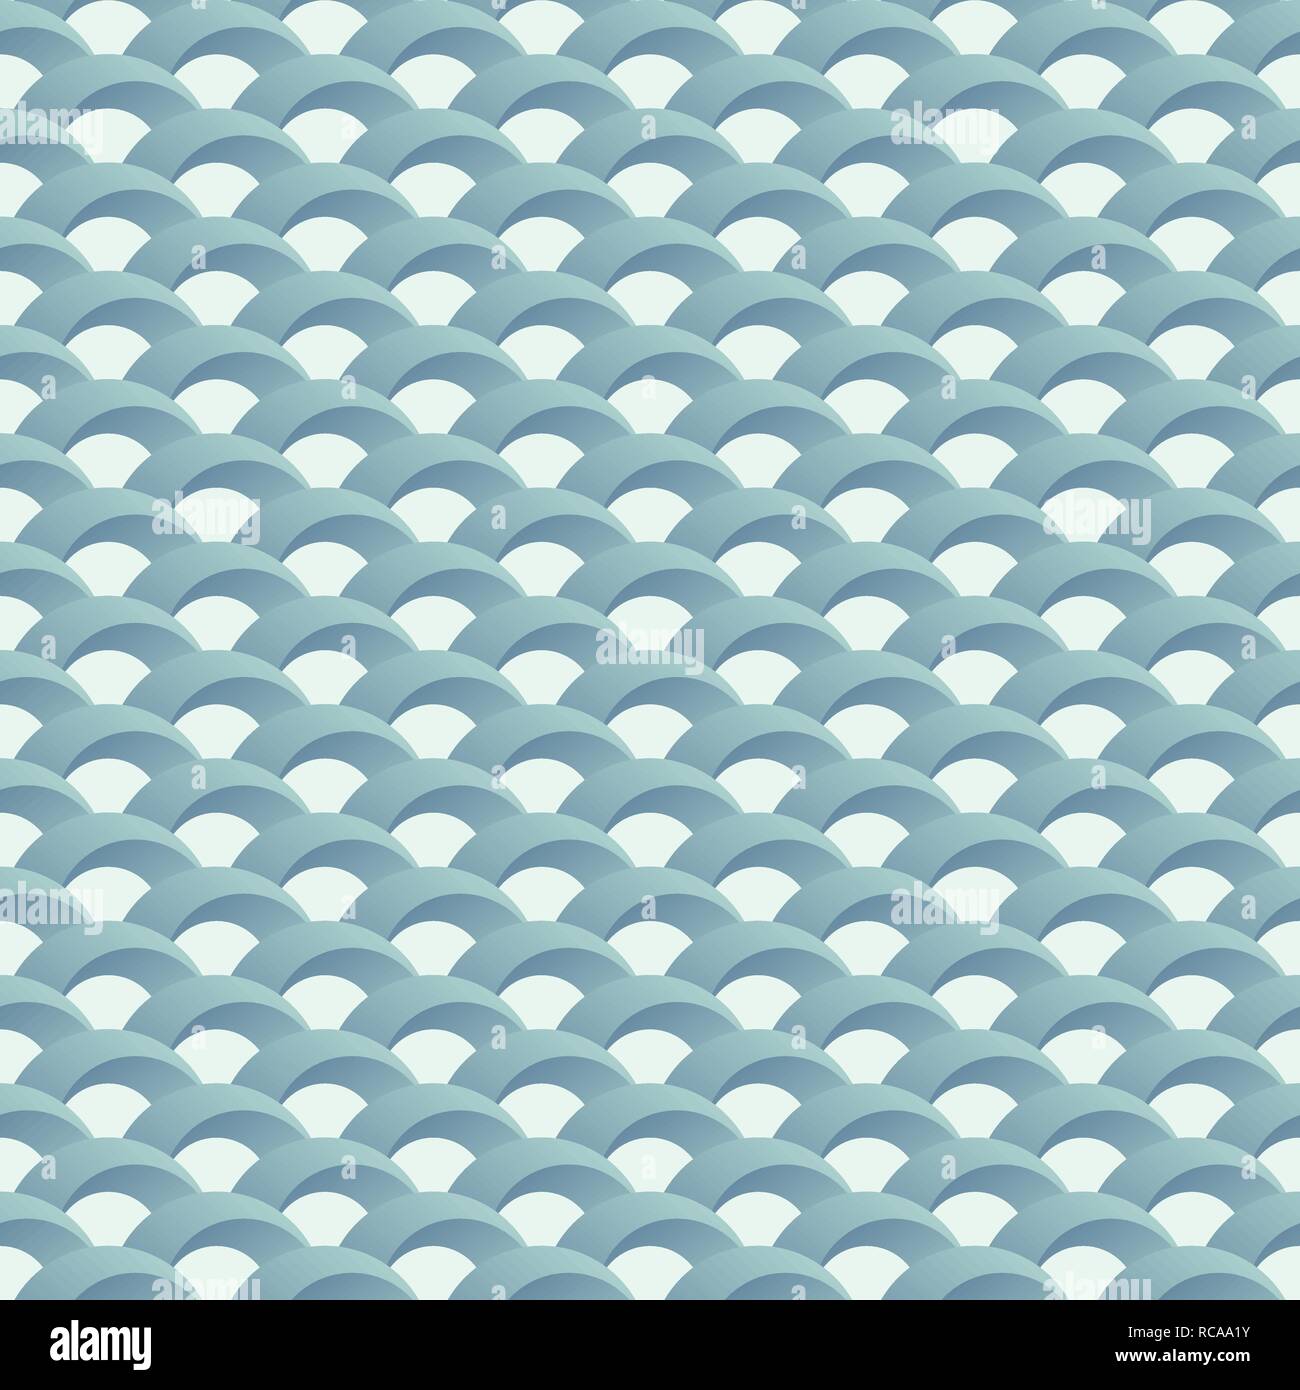 Japanese wave seamless pattern. Modern stylish texture. Repeating geometric tiles from volumetric semicircular shapes. Color gradient. Vector . Stock Vector